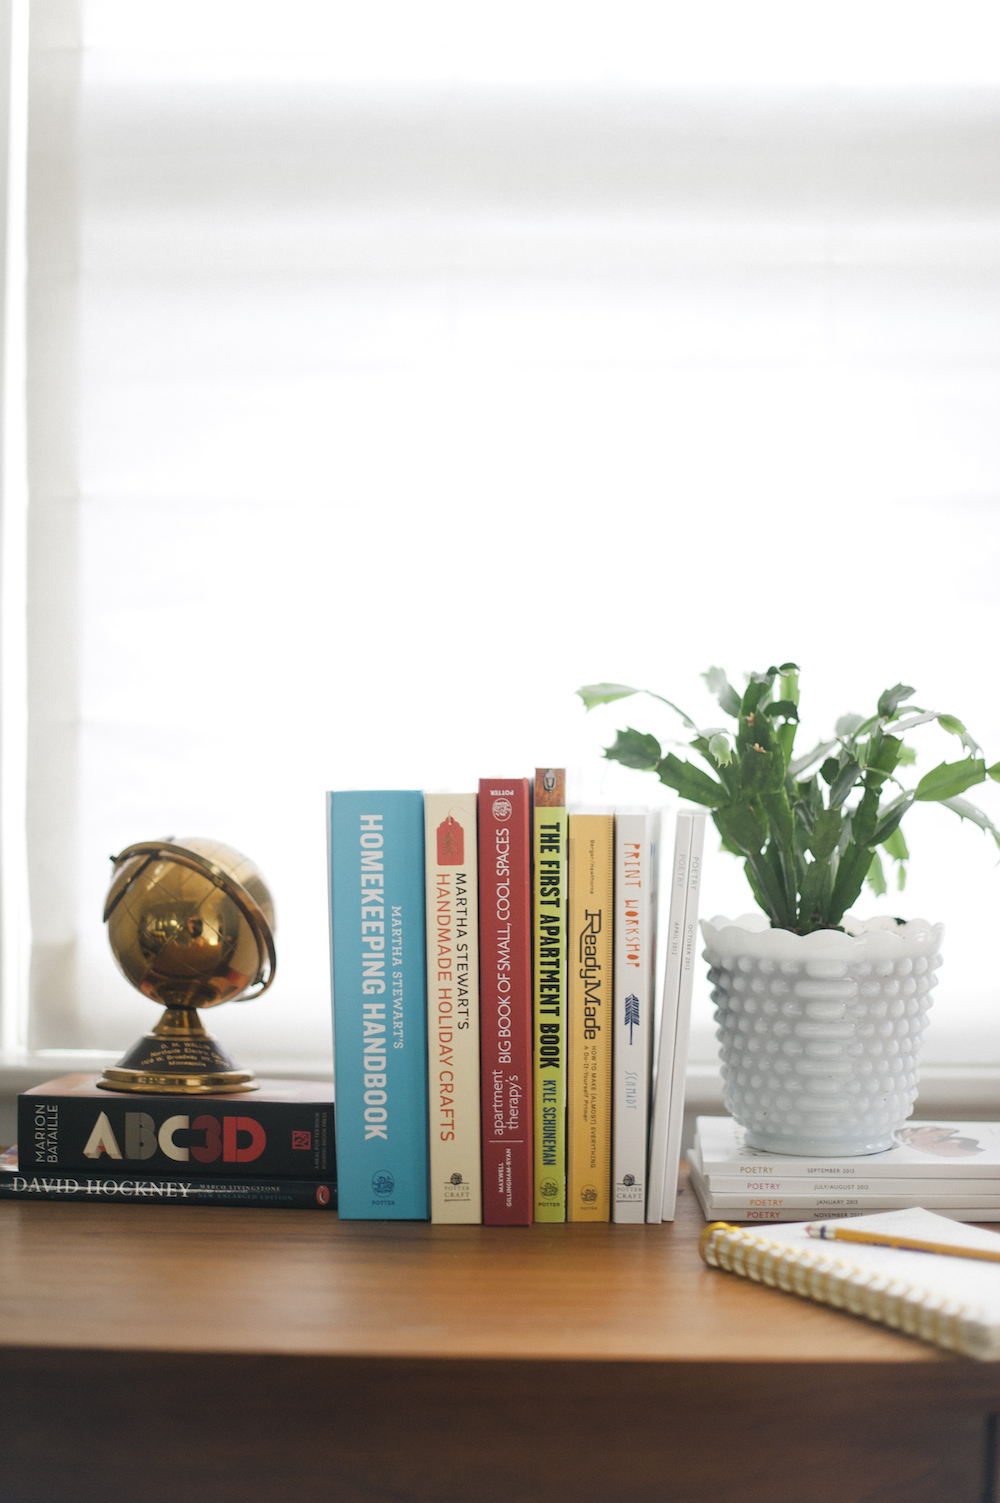 A globe and plant are being used as bookends near a window.